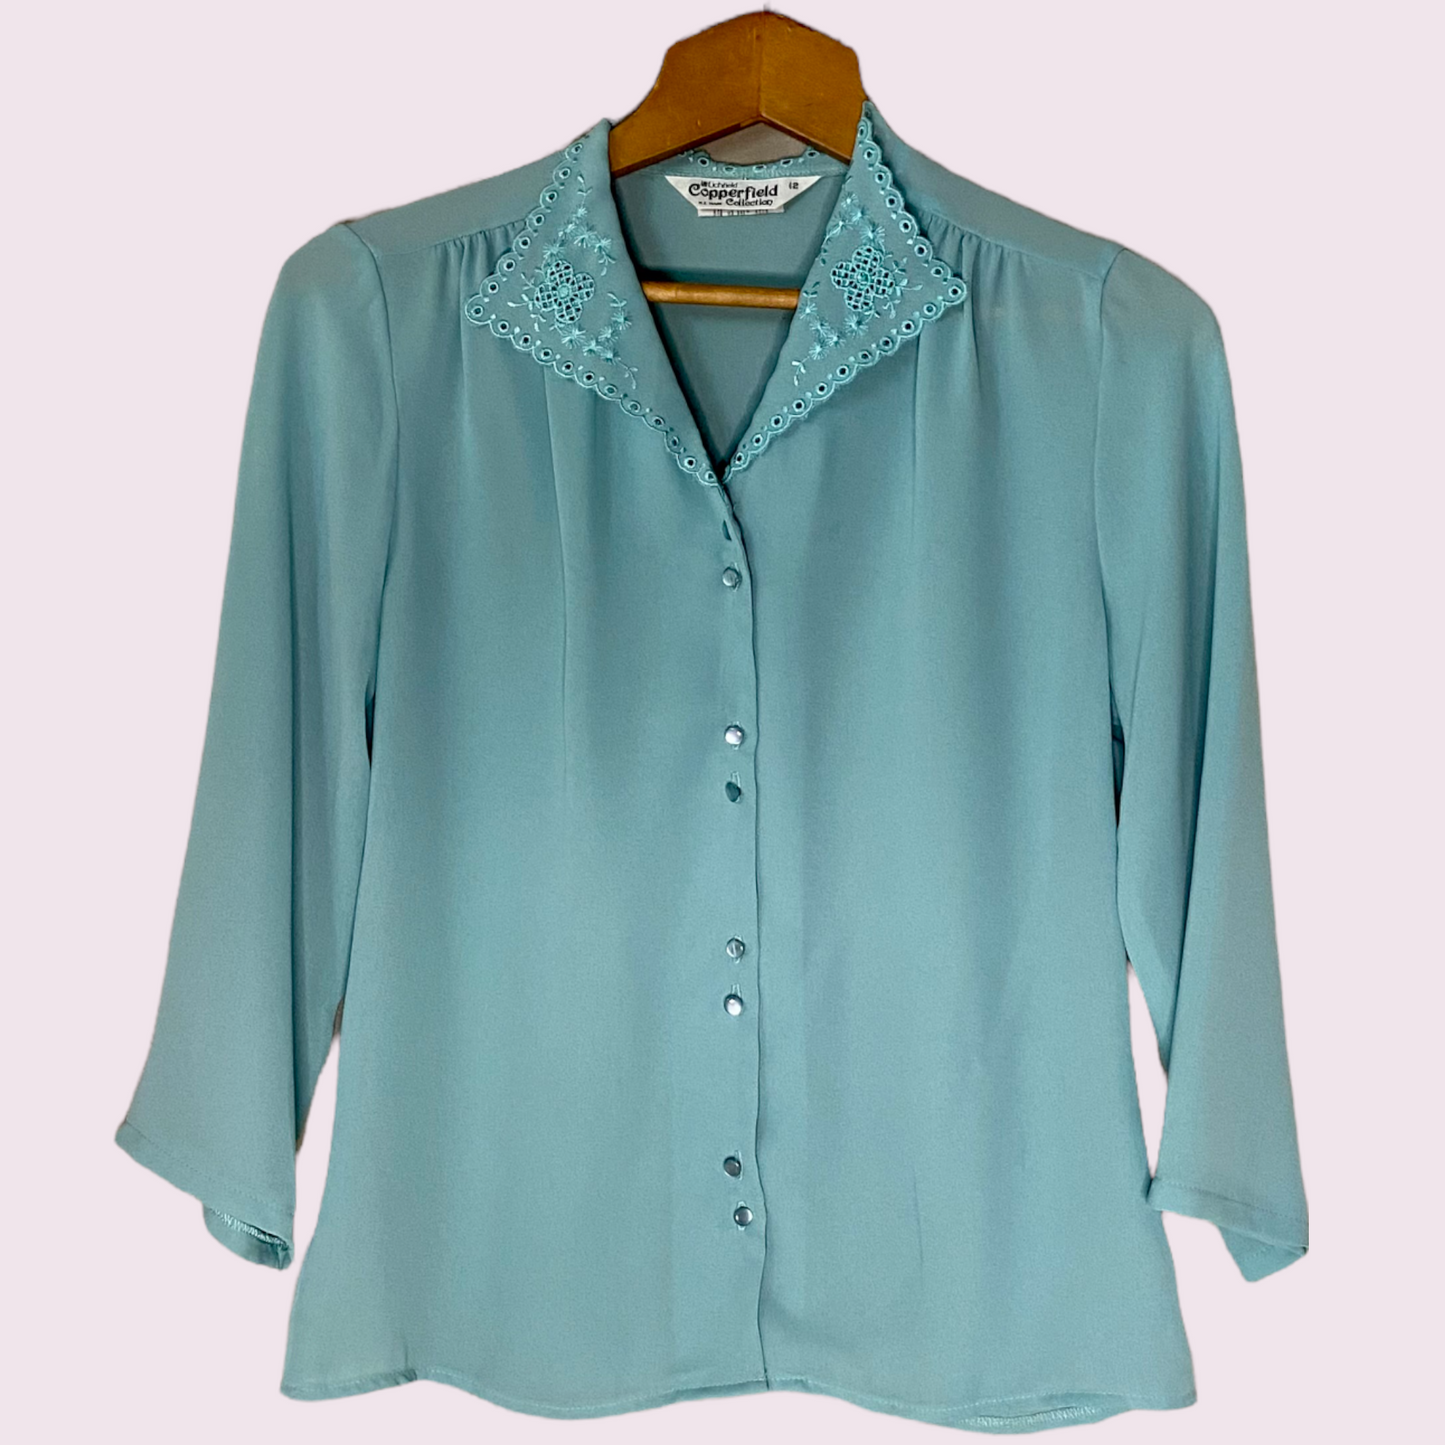 Copperfield Collection Blouse